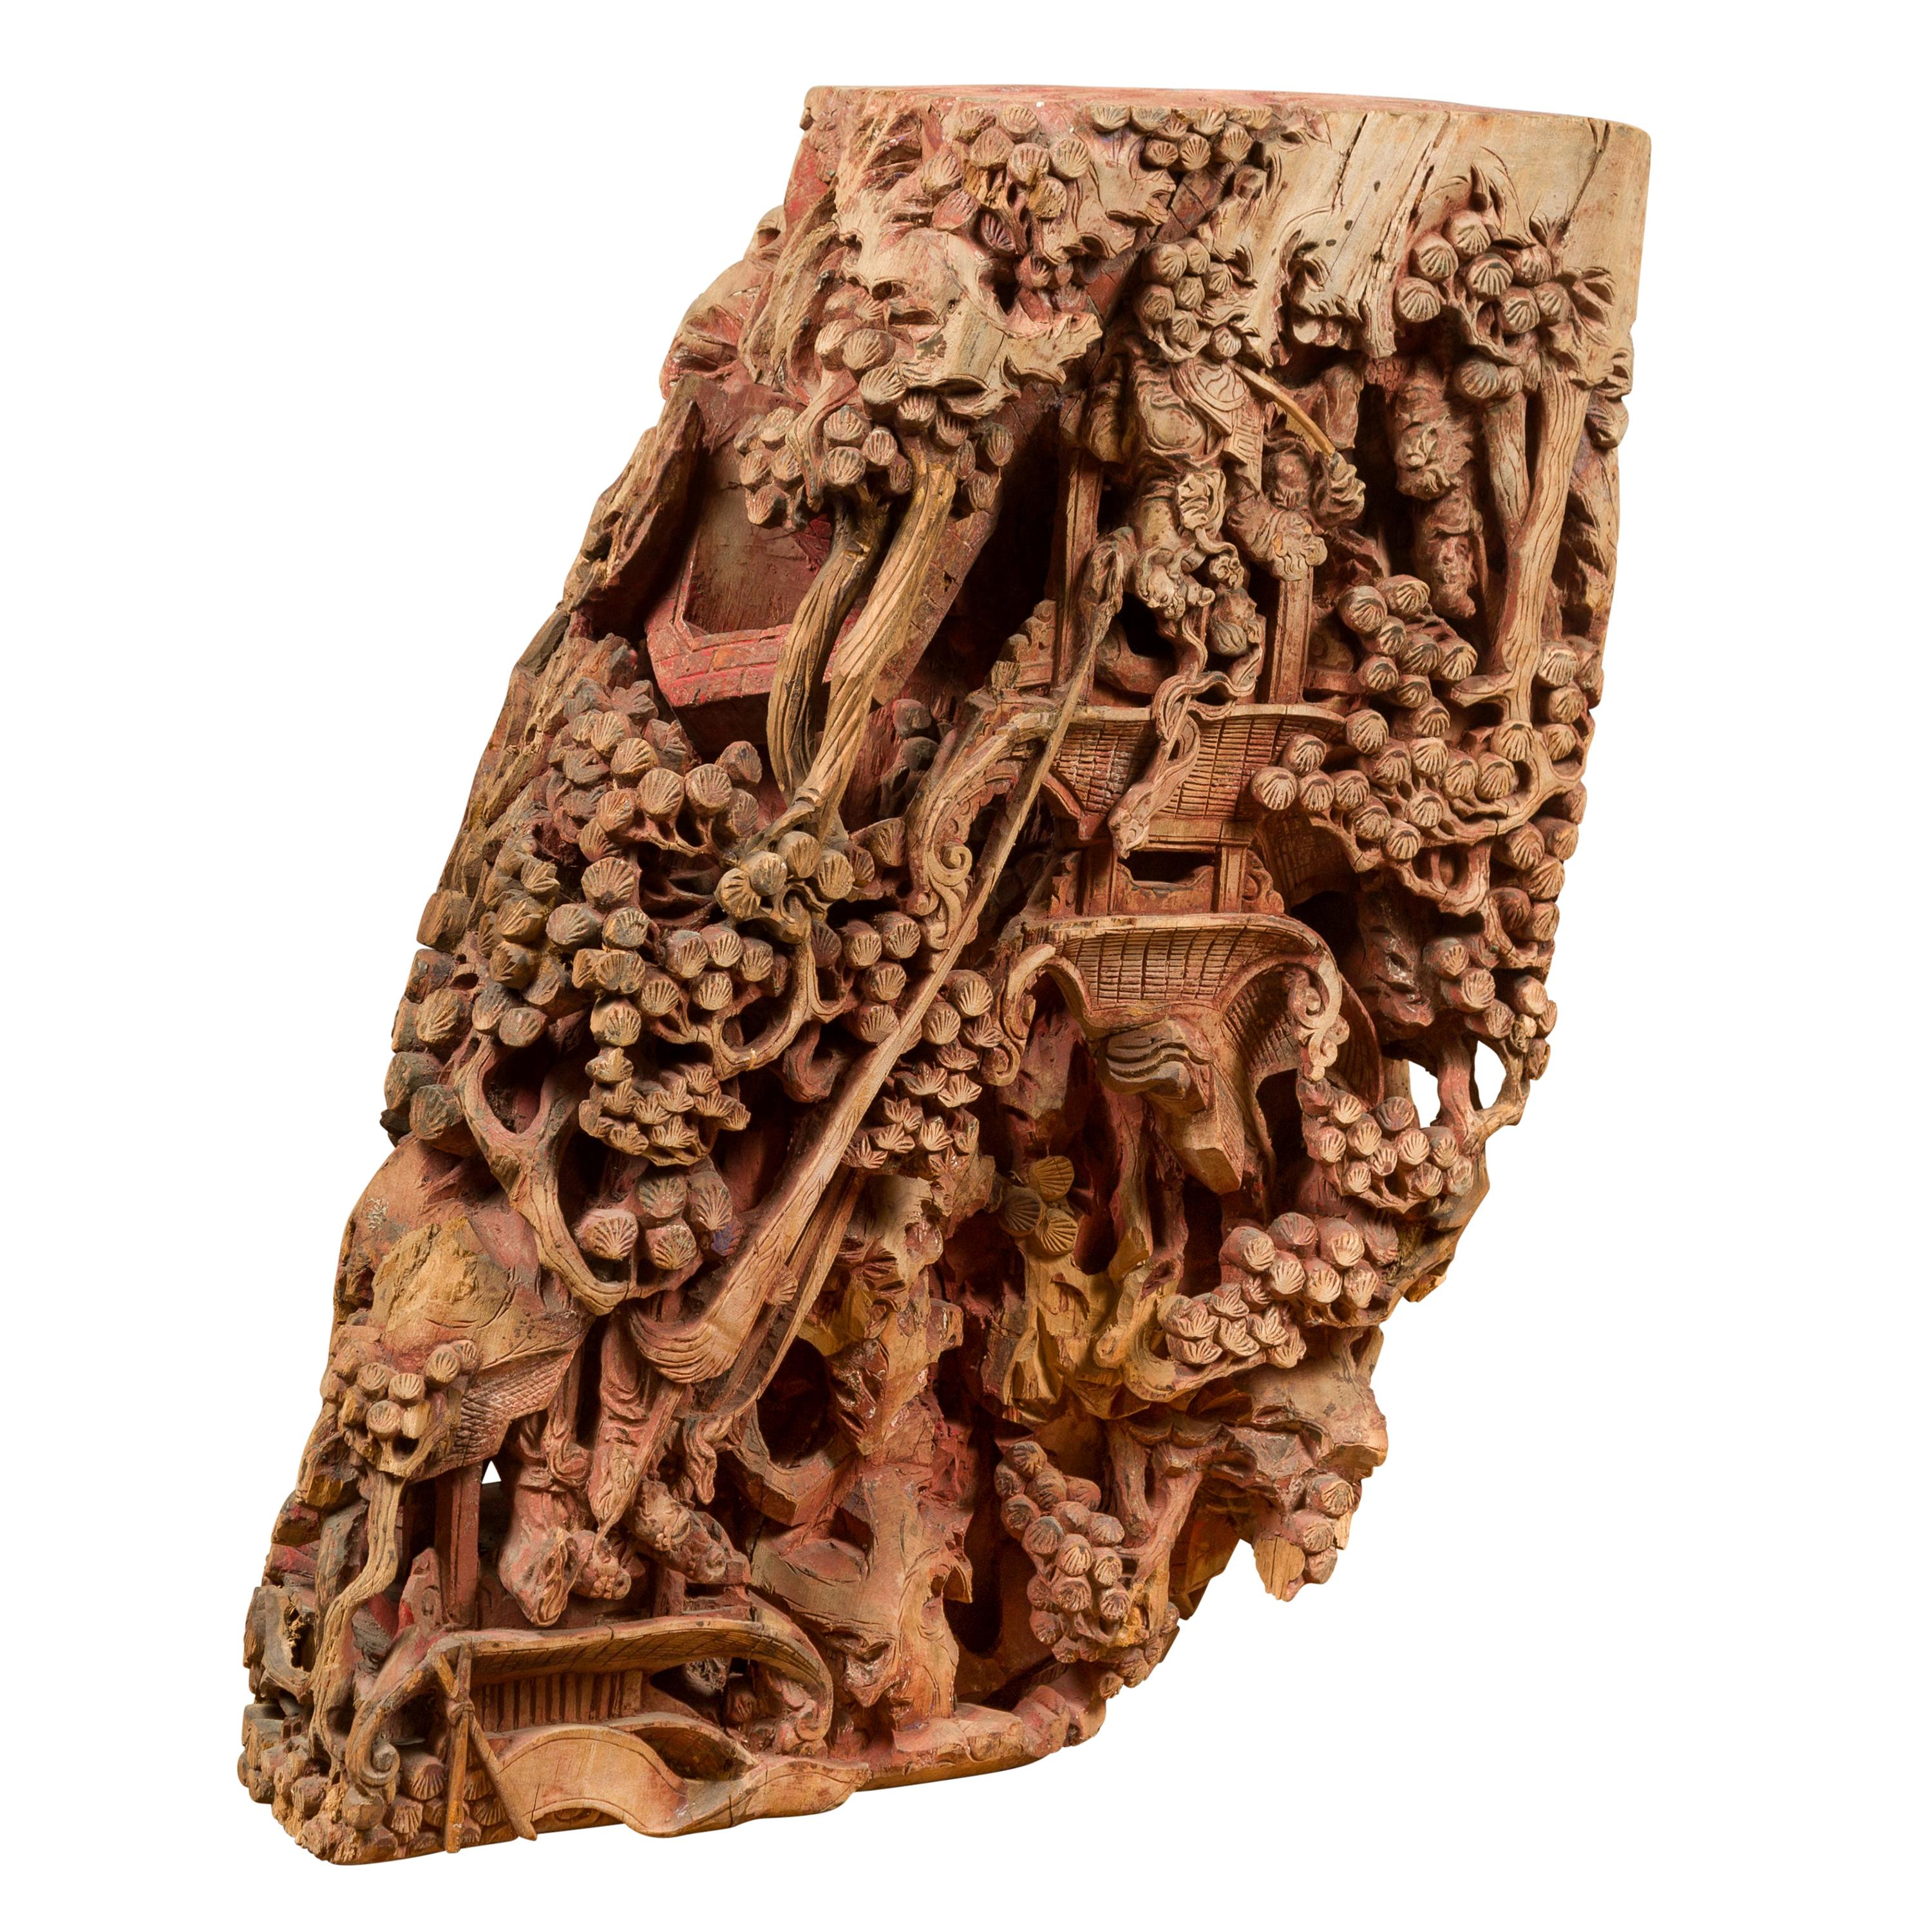 An antique Chinese hand carved wooden temple corbel from the 19th century, with characters, pagodas, vegetation and red polychromy. This Chinese architectural fragment is carved with an abundant décor featuring dynamic Chinese characters actively